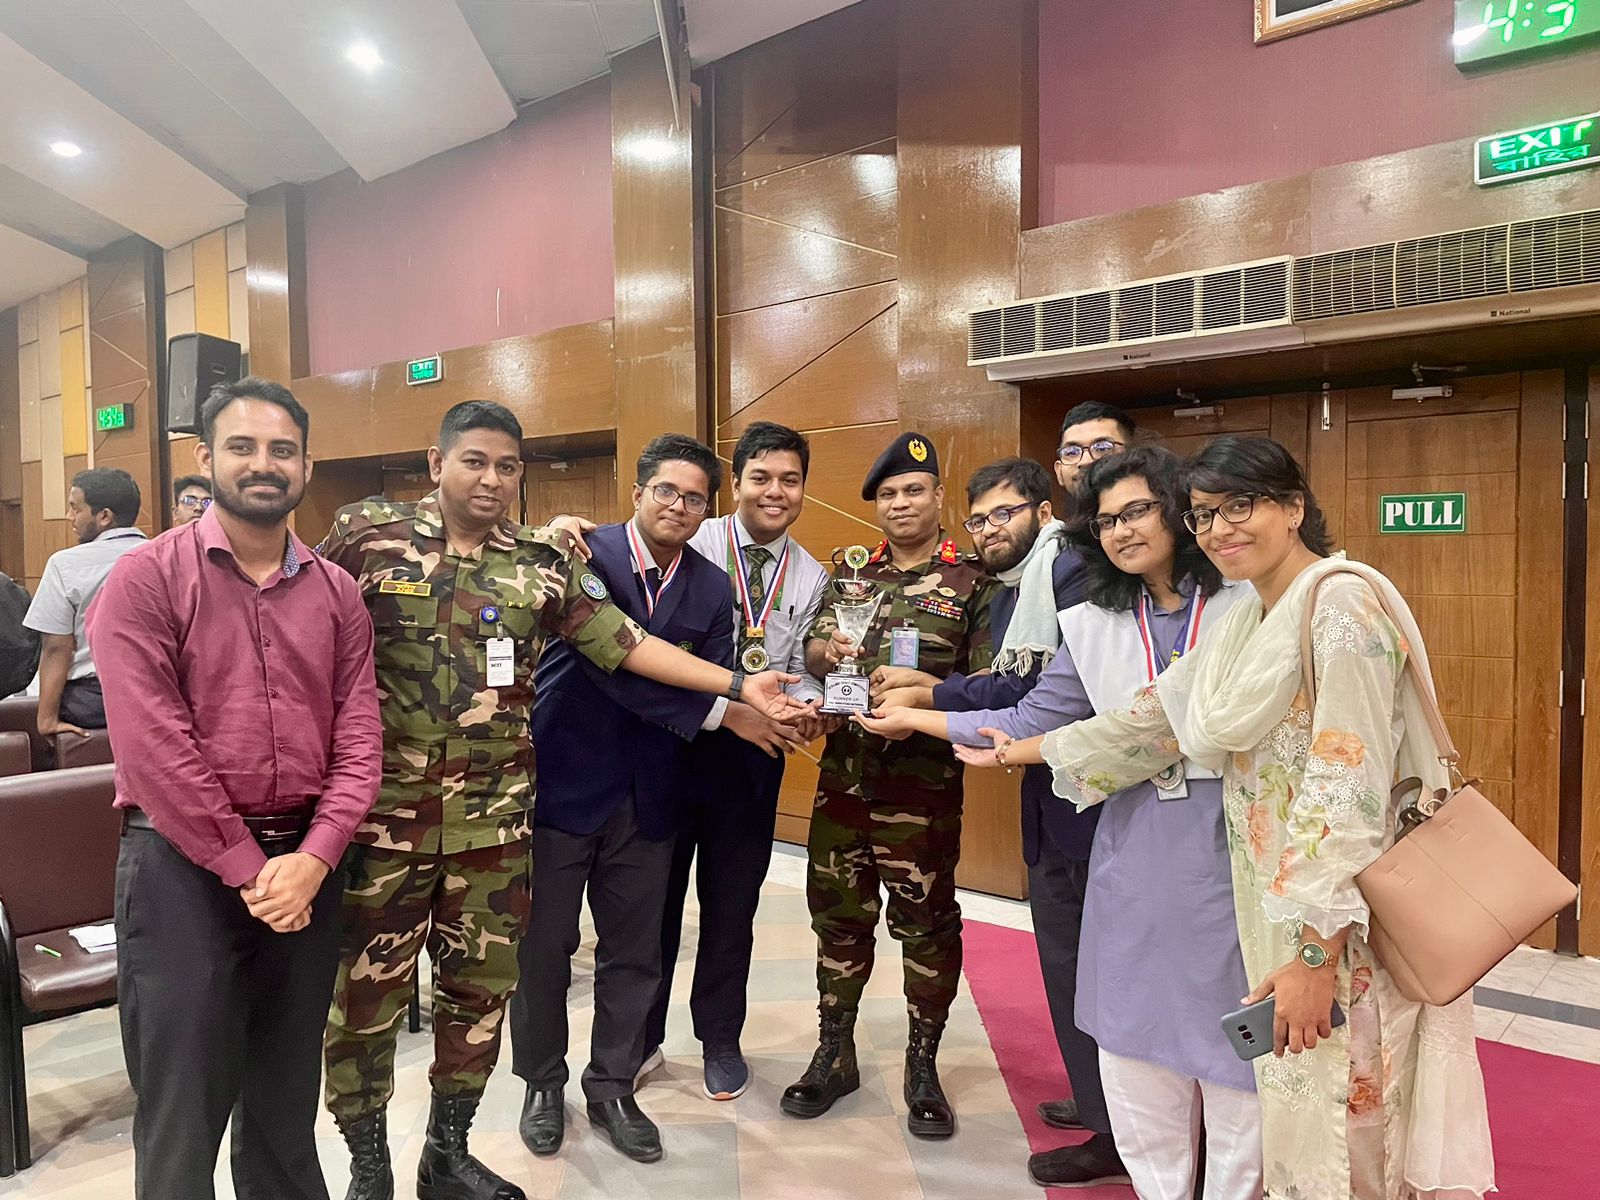 ME Dept 1st Runners-Up in Intra MIST Debate Competition 2022